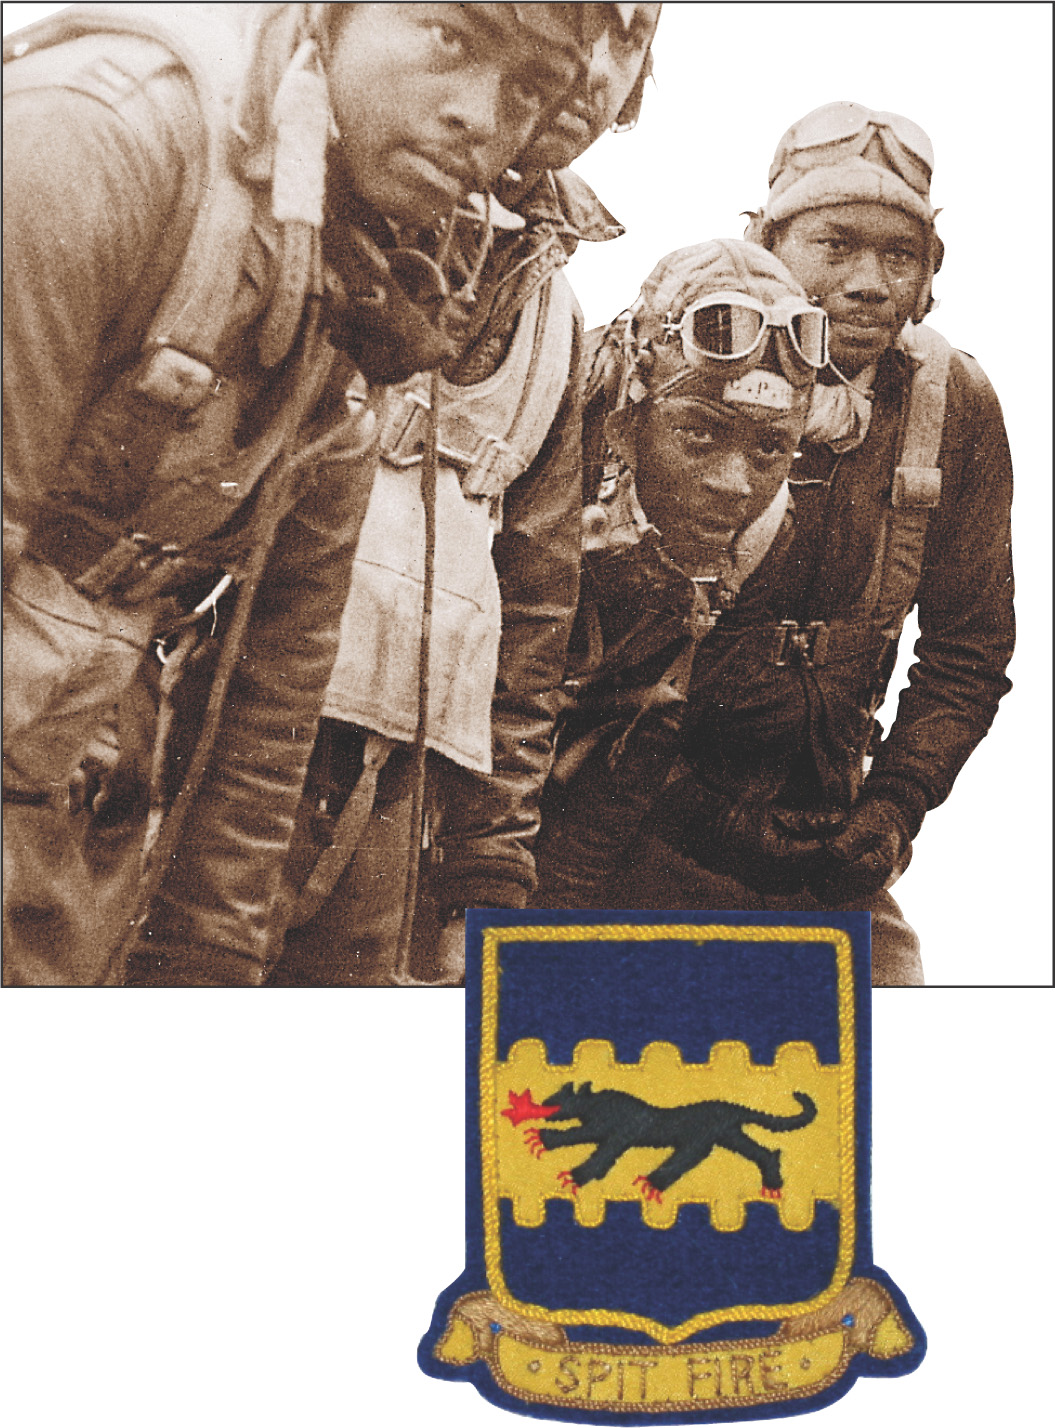 Photo: African-American pilots and their Spit Fire insignia of a tiger breathing fire